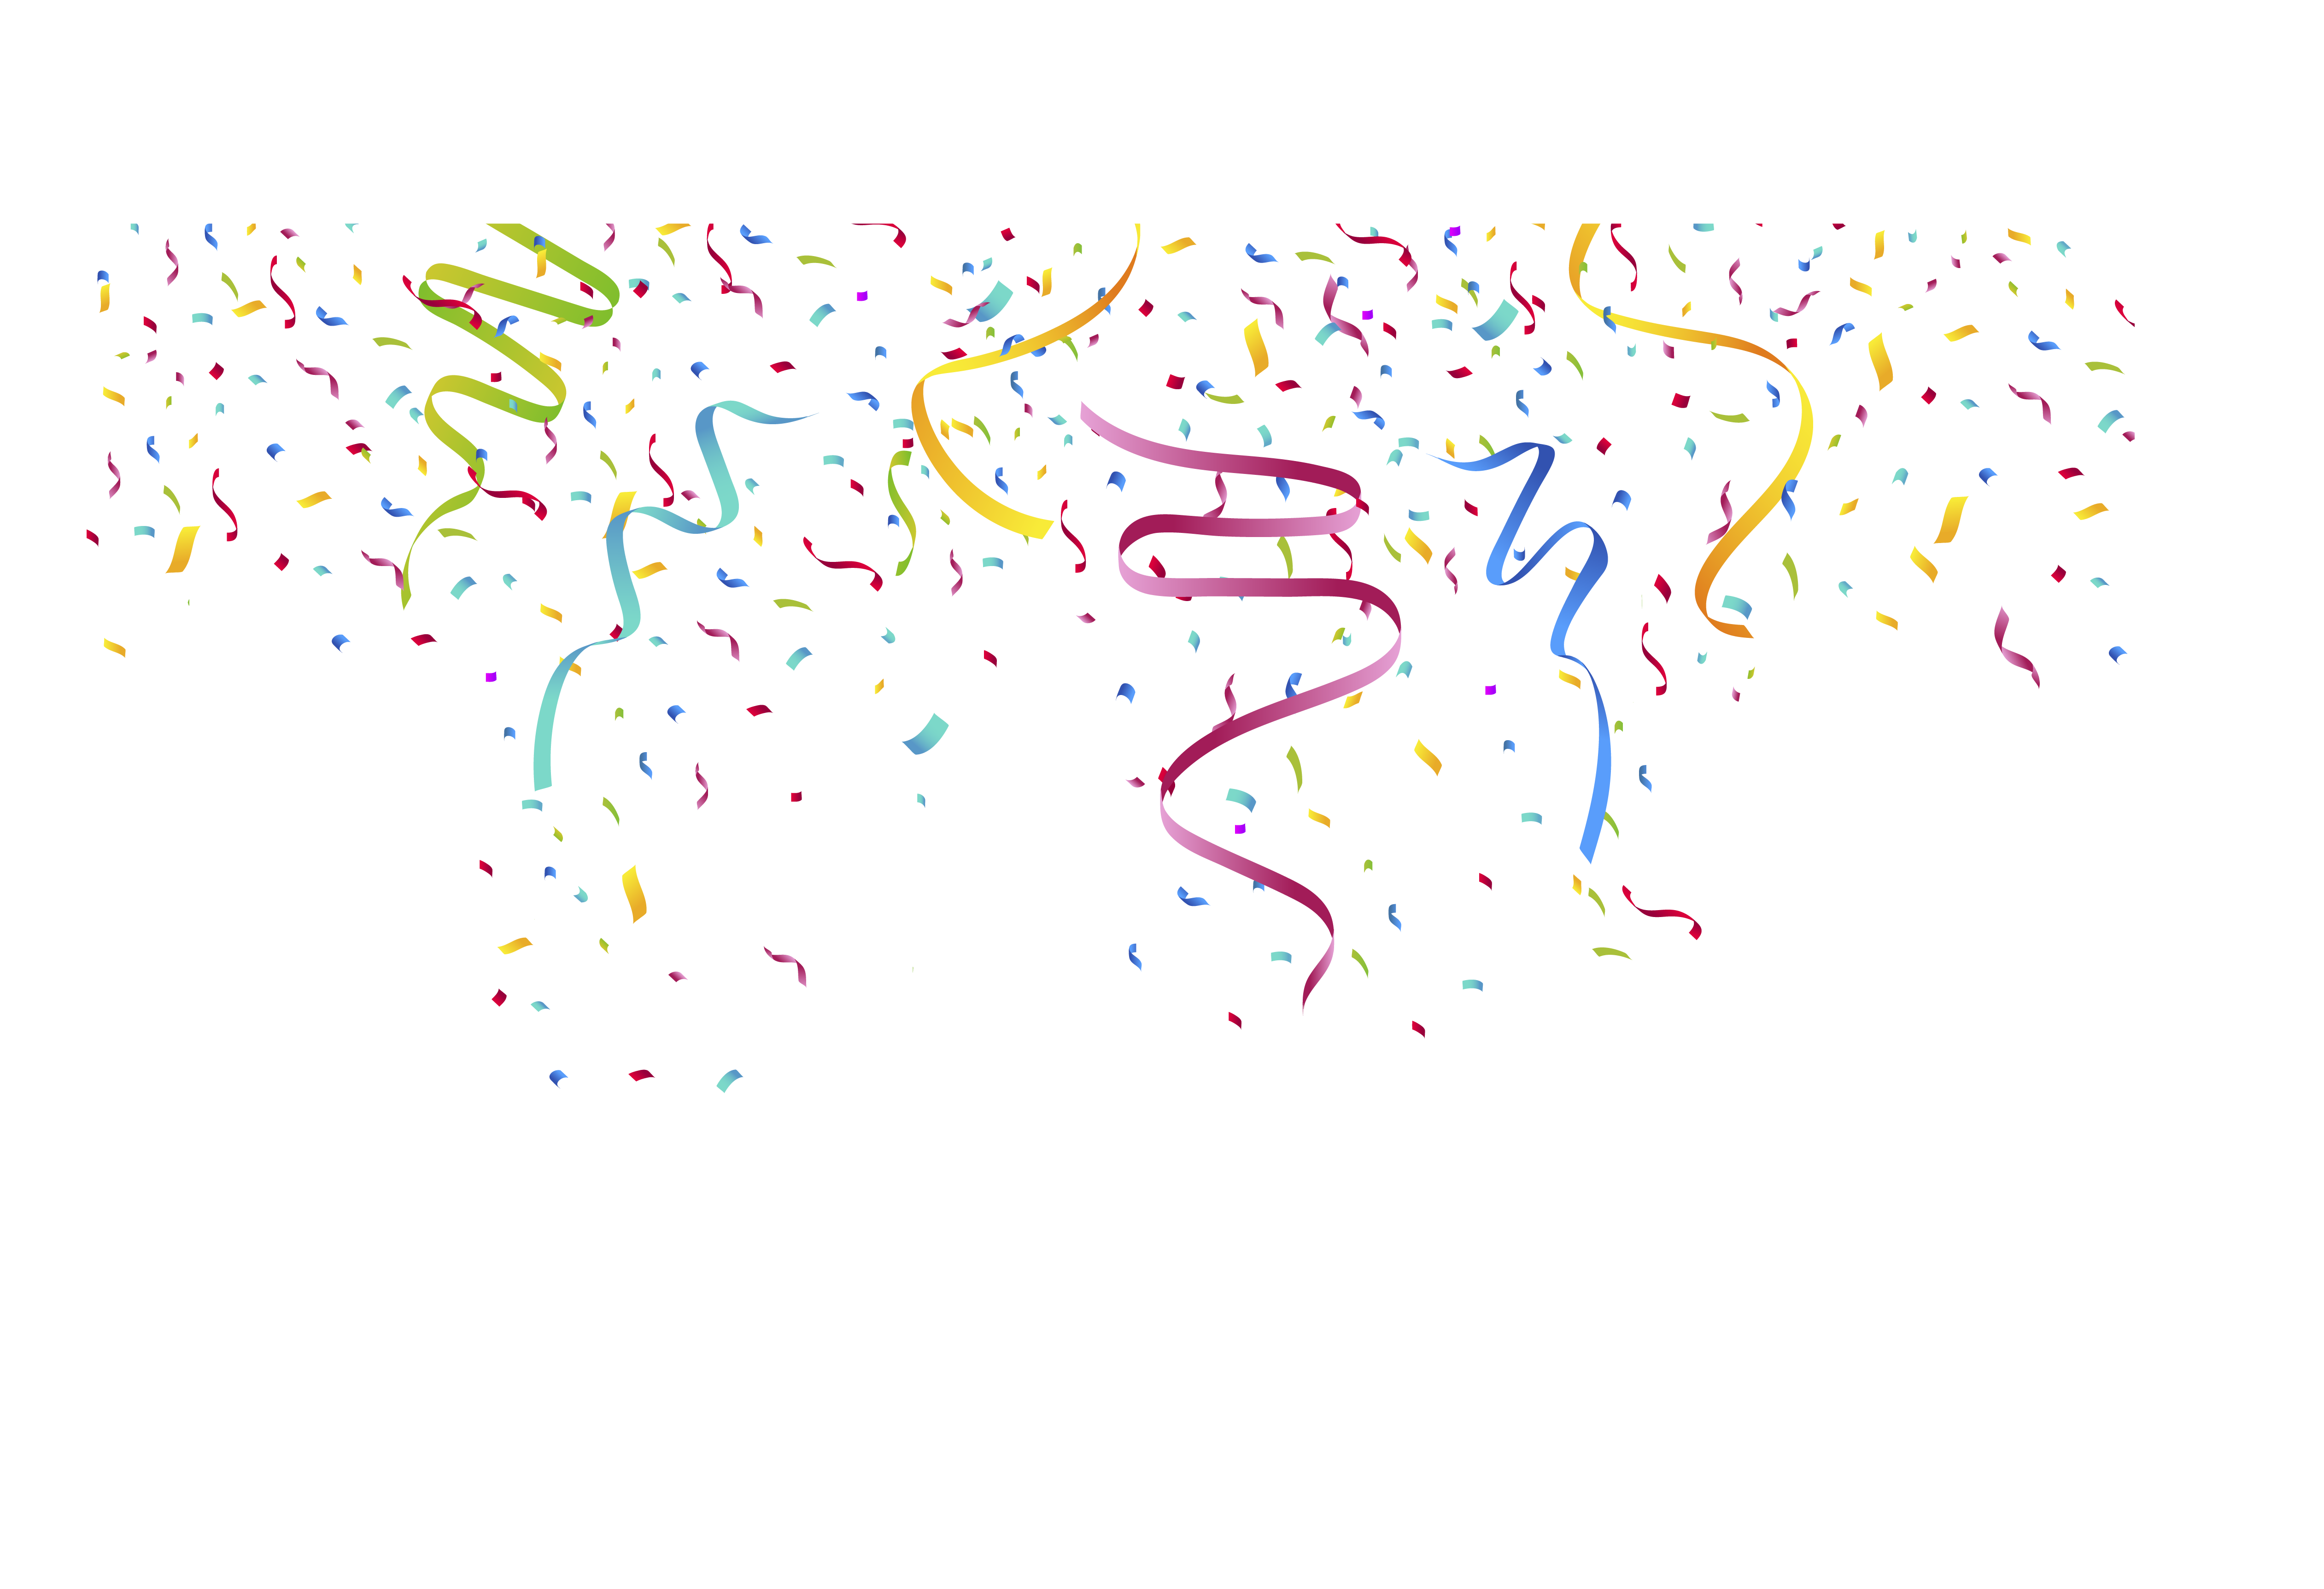 confetti images transparent pictures only #8824